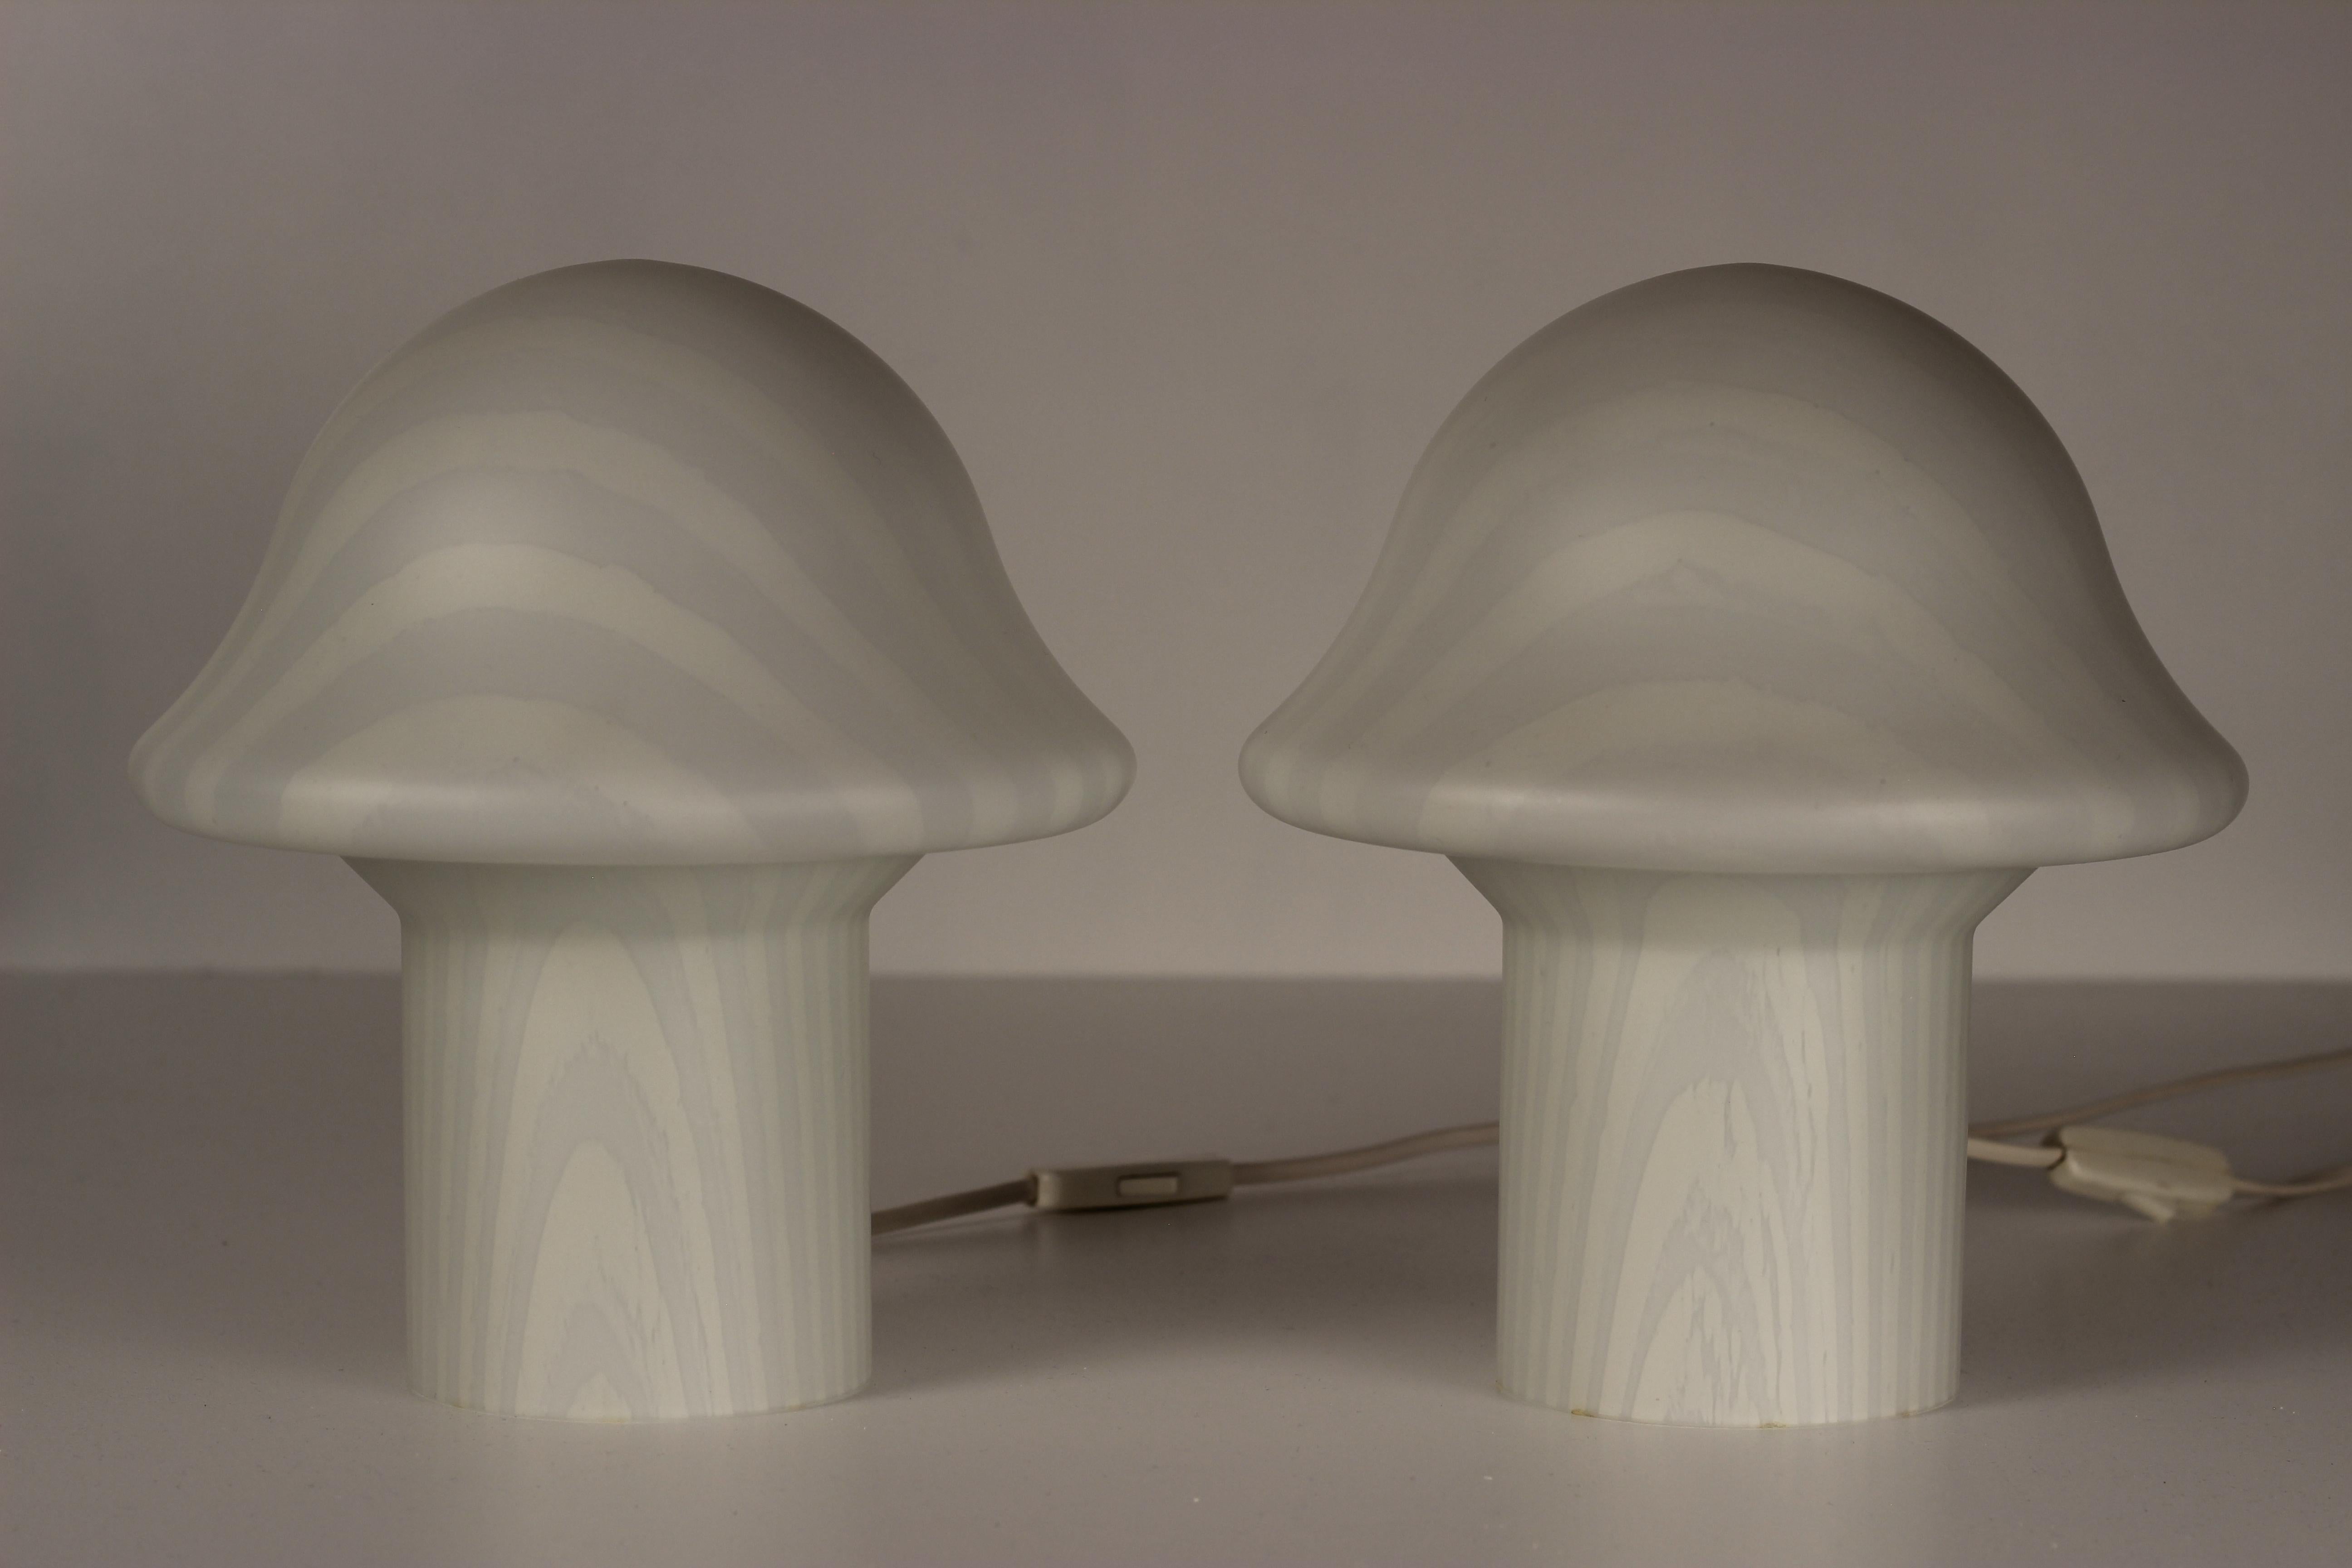 Mid-20th Century Pair of Peill & Putzler Glass Mushroom Table Lights Made in Germany 1960’s